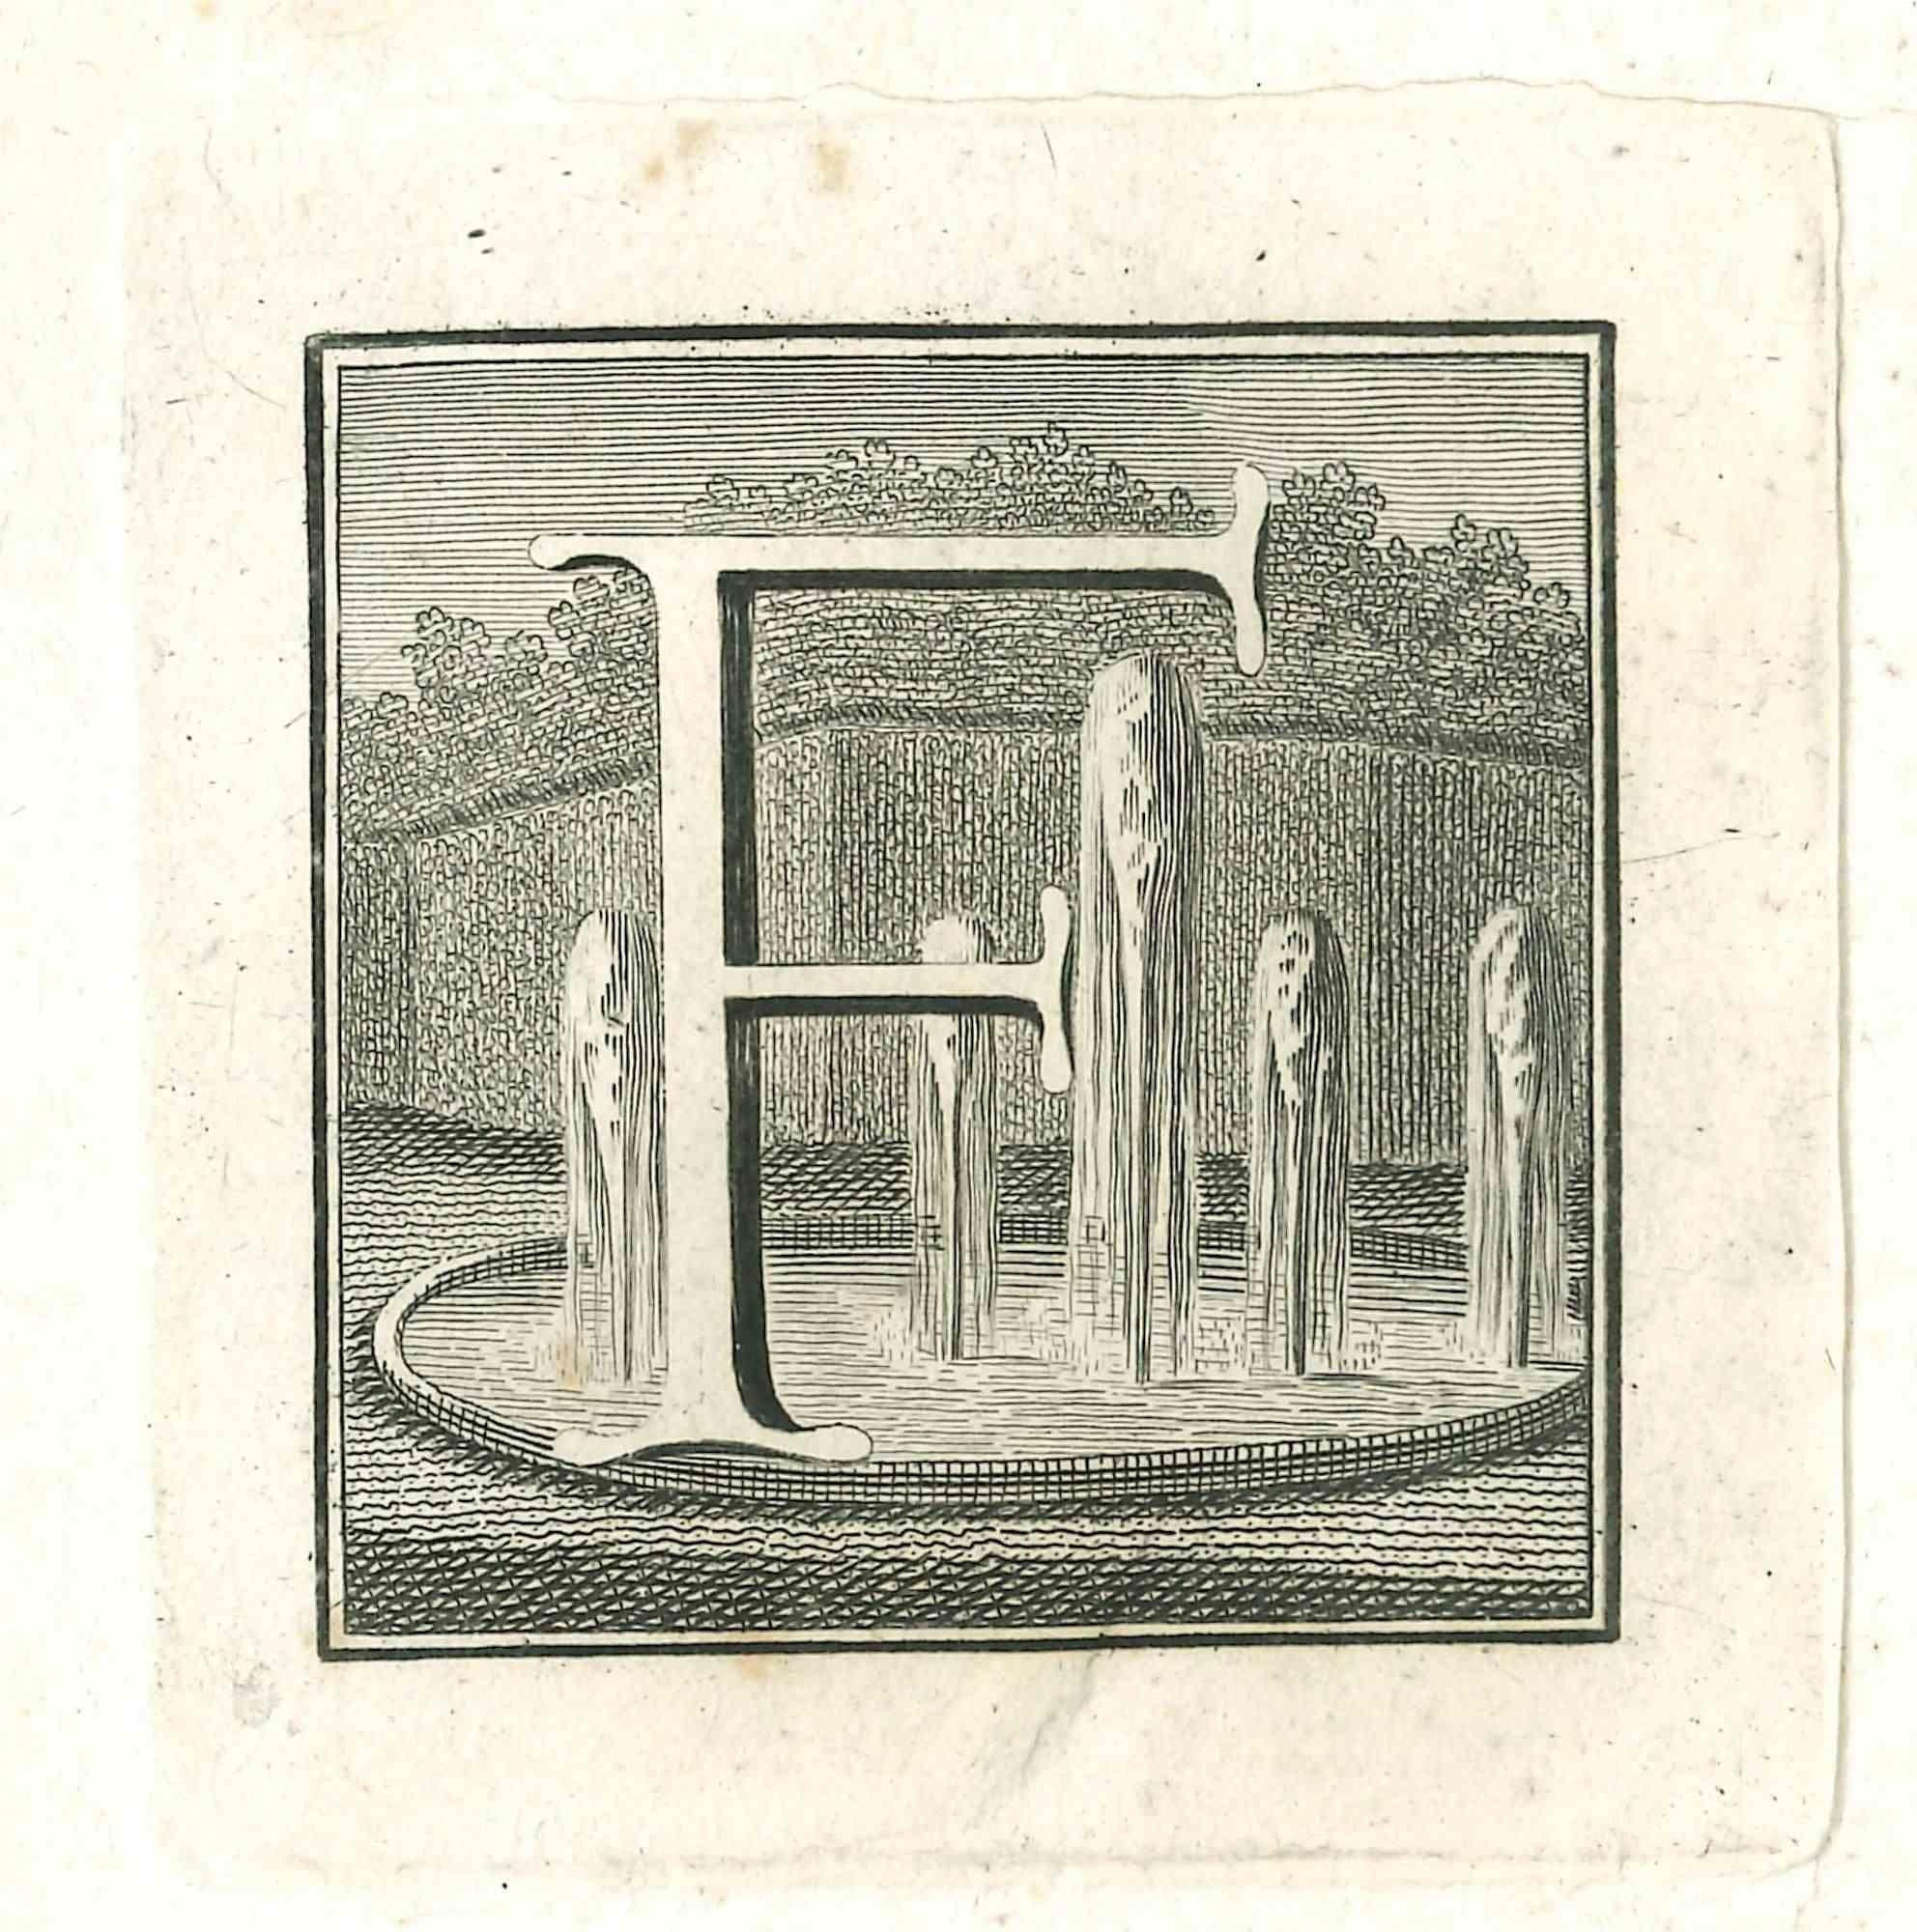 Unknown Figurative Print - Capital Letter for the Antiquities of Herculaneum Exposed-Etching -18th Century